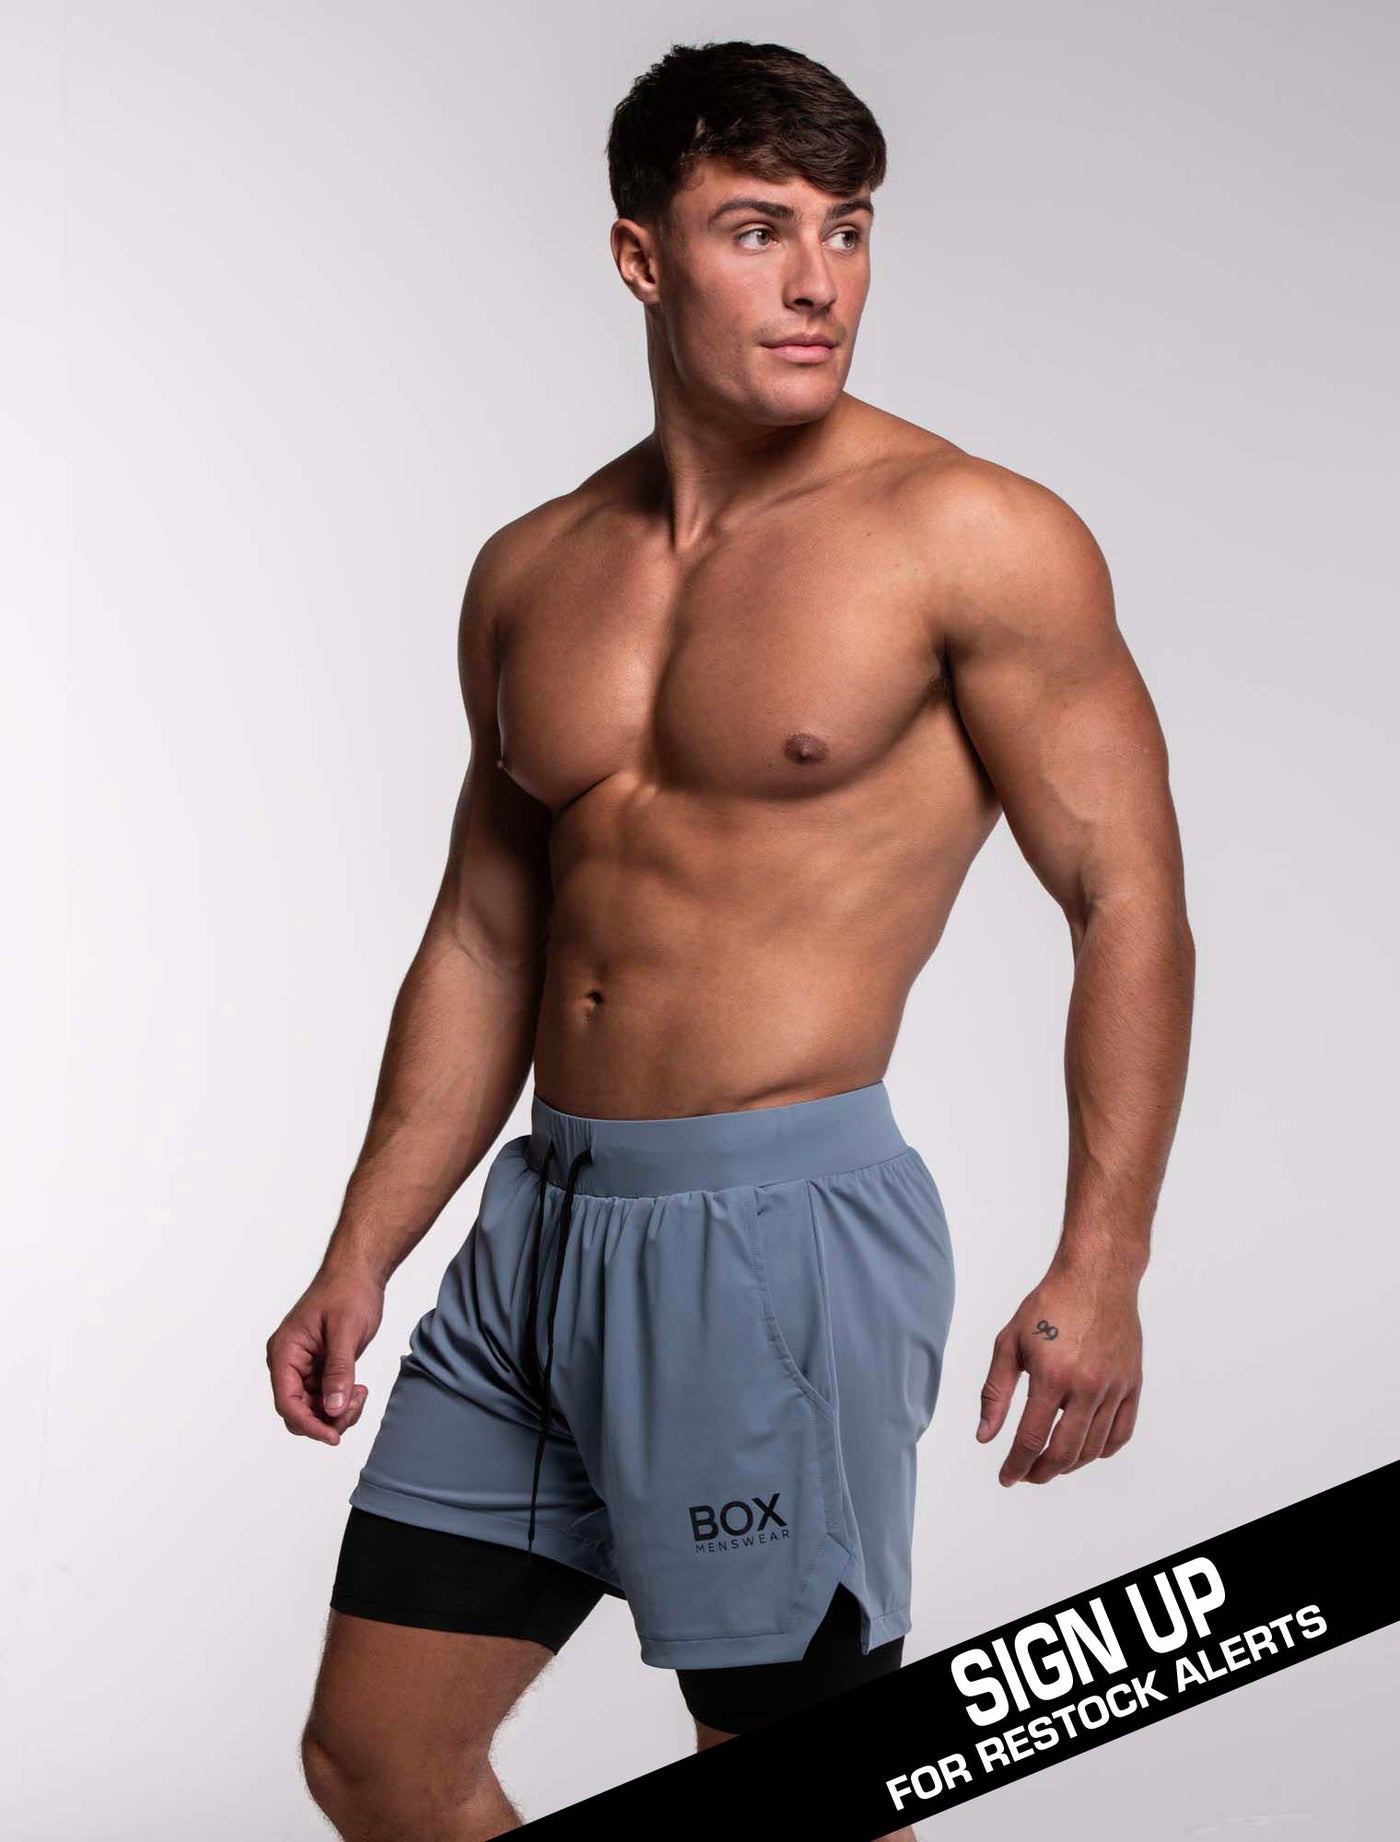 Mens Double Layer Sports Shorts - Charcoal